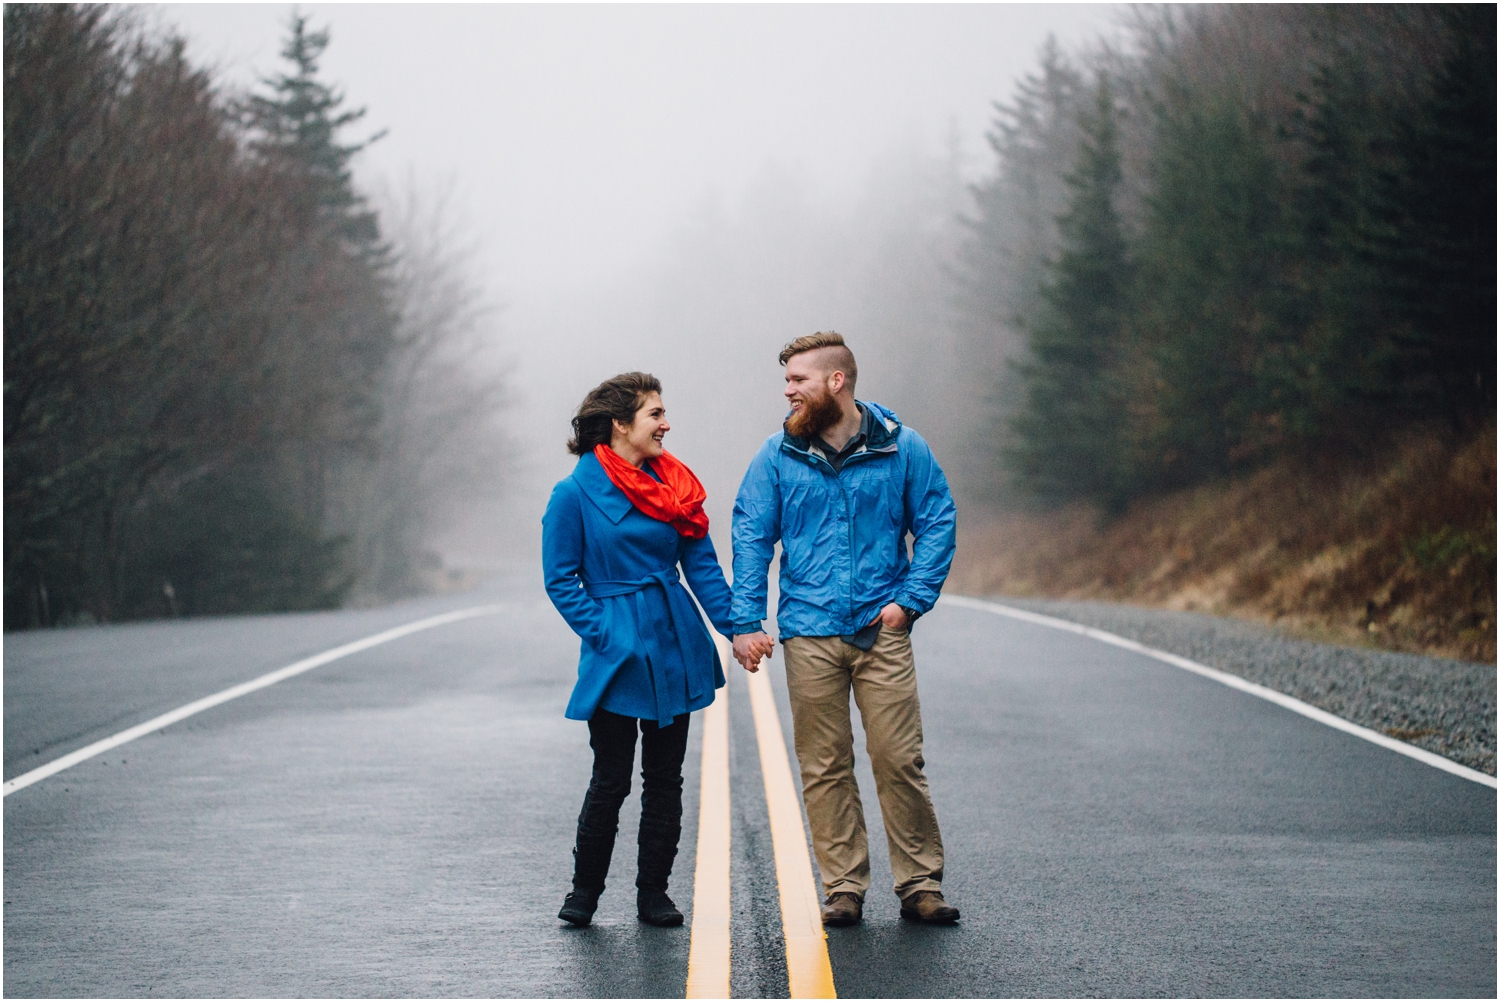 katy-sergent-photography-grayson-highlands-engagement-session-mouth-of-wilson-virginia-damascus-appalachian-trail-tennessee-wedding-elopement_0016.jpg